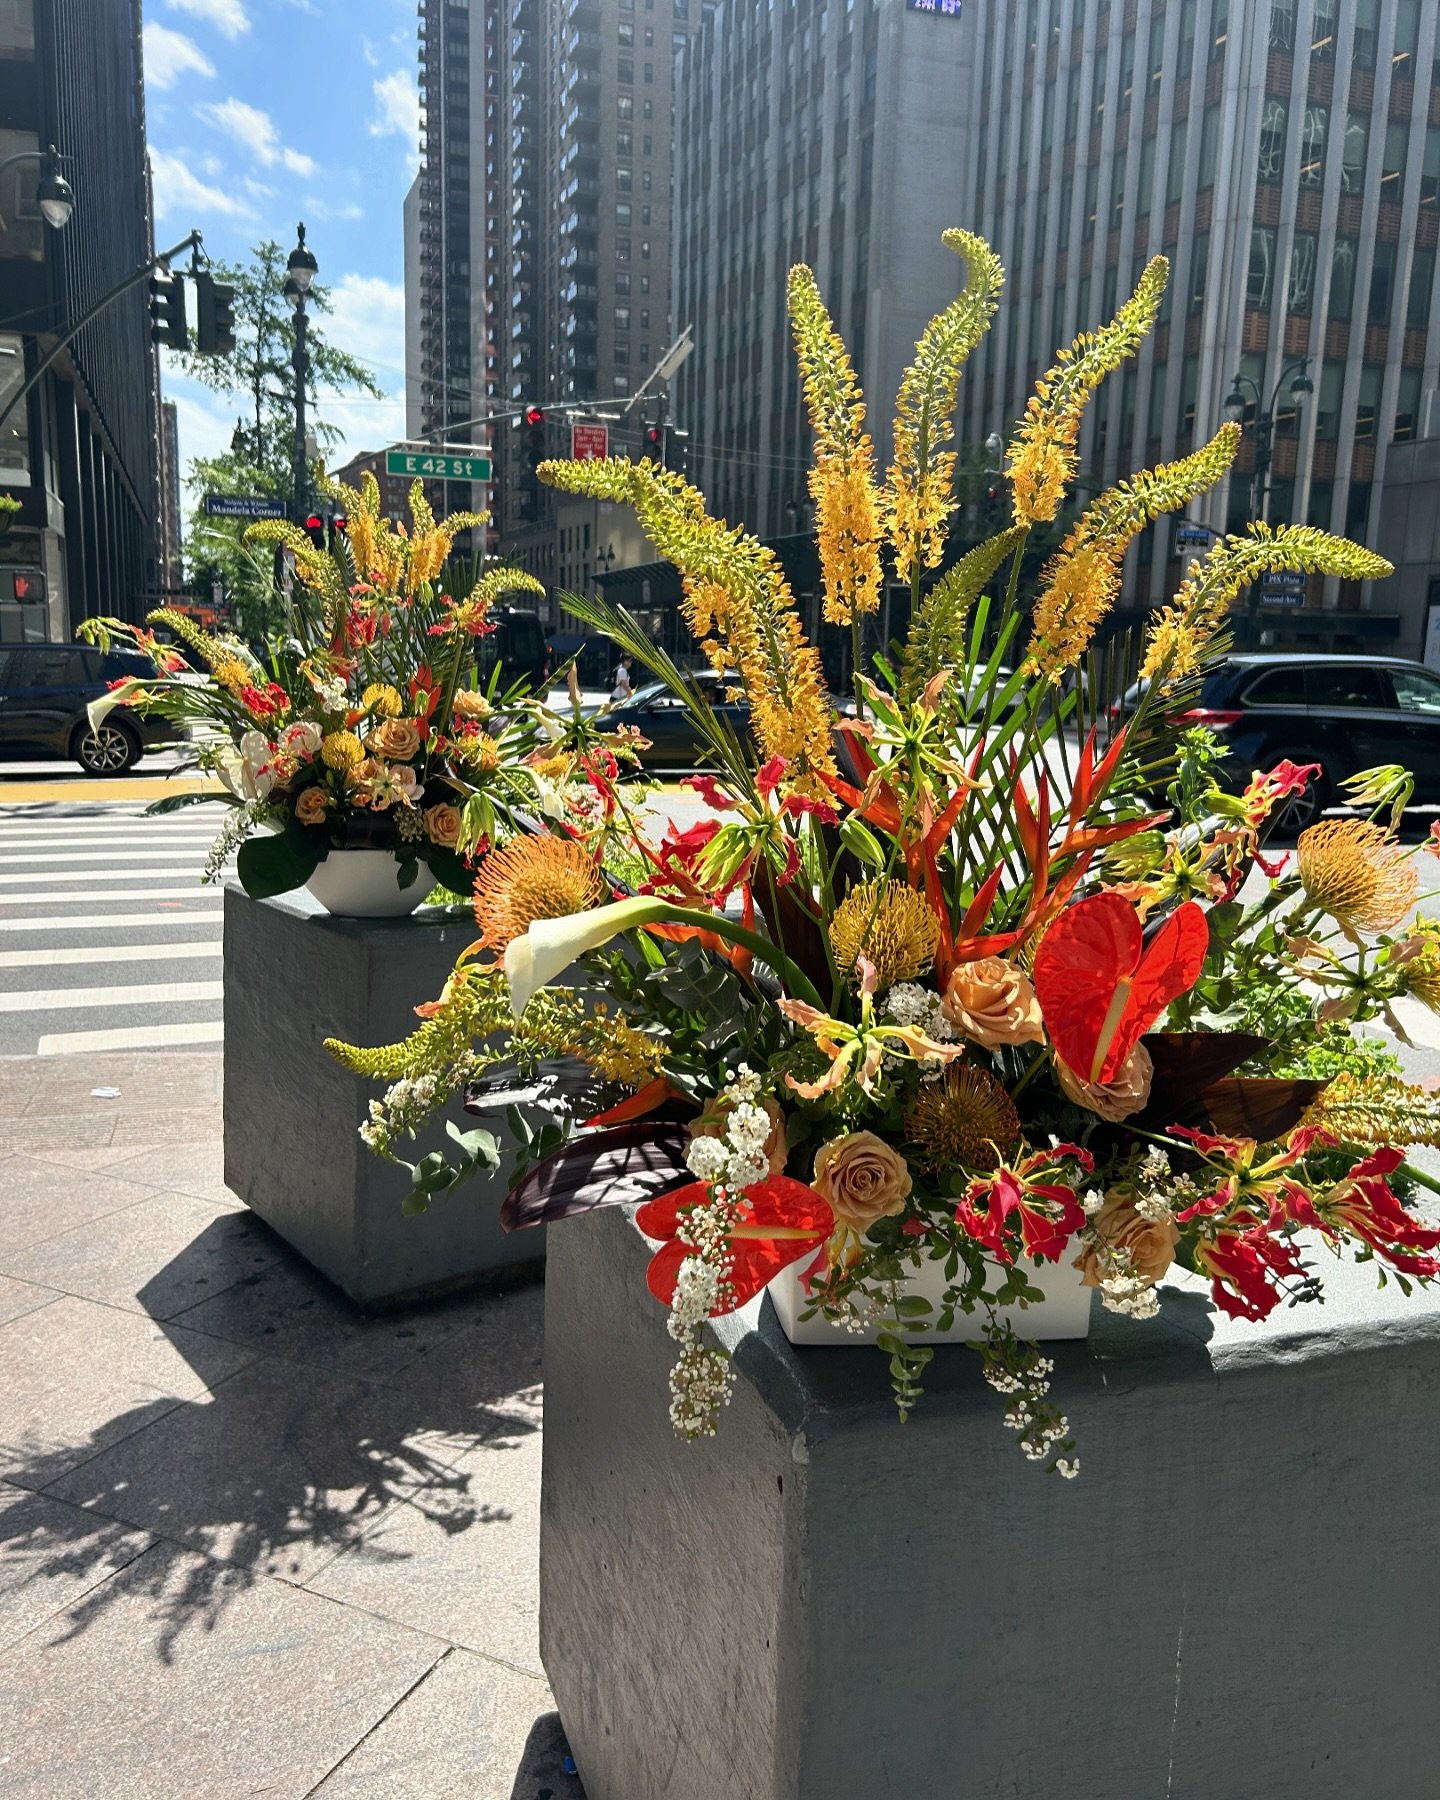 In the heart of city, blooms as vibrant as her love. Happy Mother&rsquo;s Day!
.
.
.
#mothersdayflowers #nycflorist #nycdelivery #flowerdelivery #happymothersday #loveyoumom #manhattanflorist #manhattanflowers